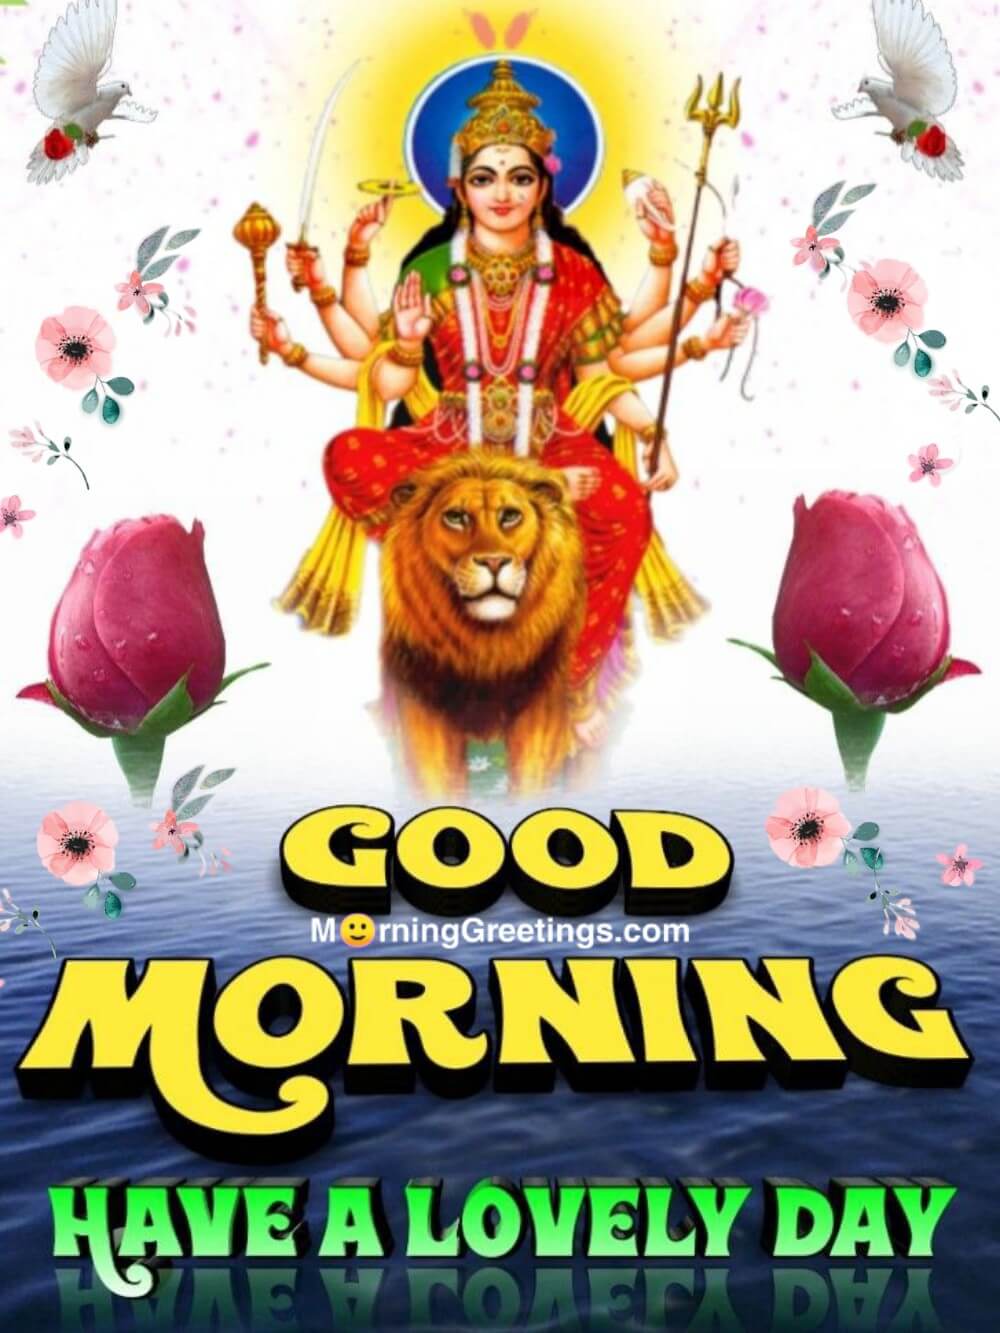 15 Best Morning Wishes Photos Of Devi Maa - Morning Greetings ...